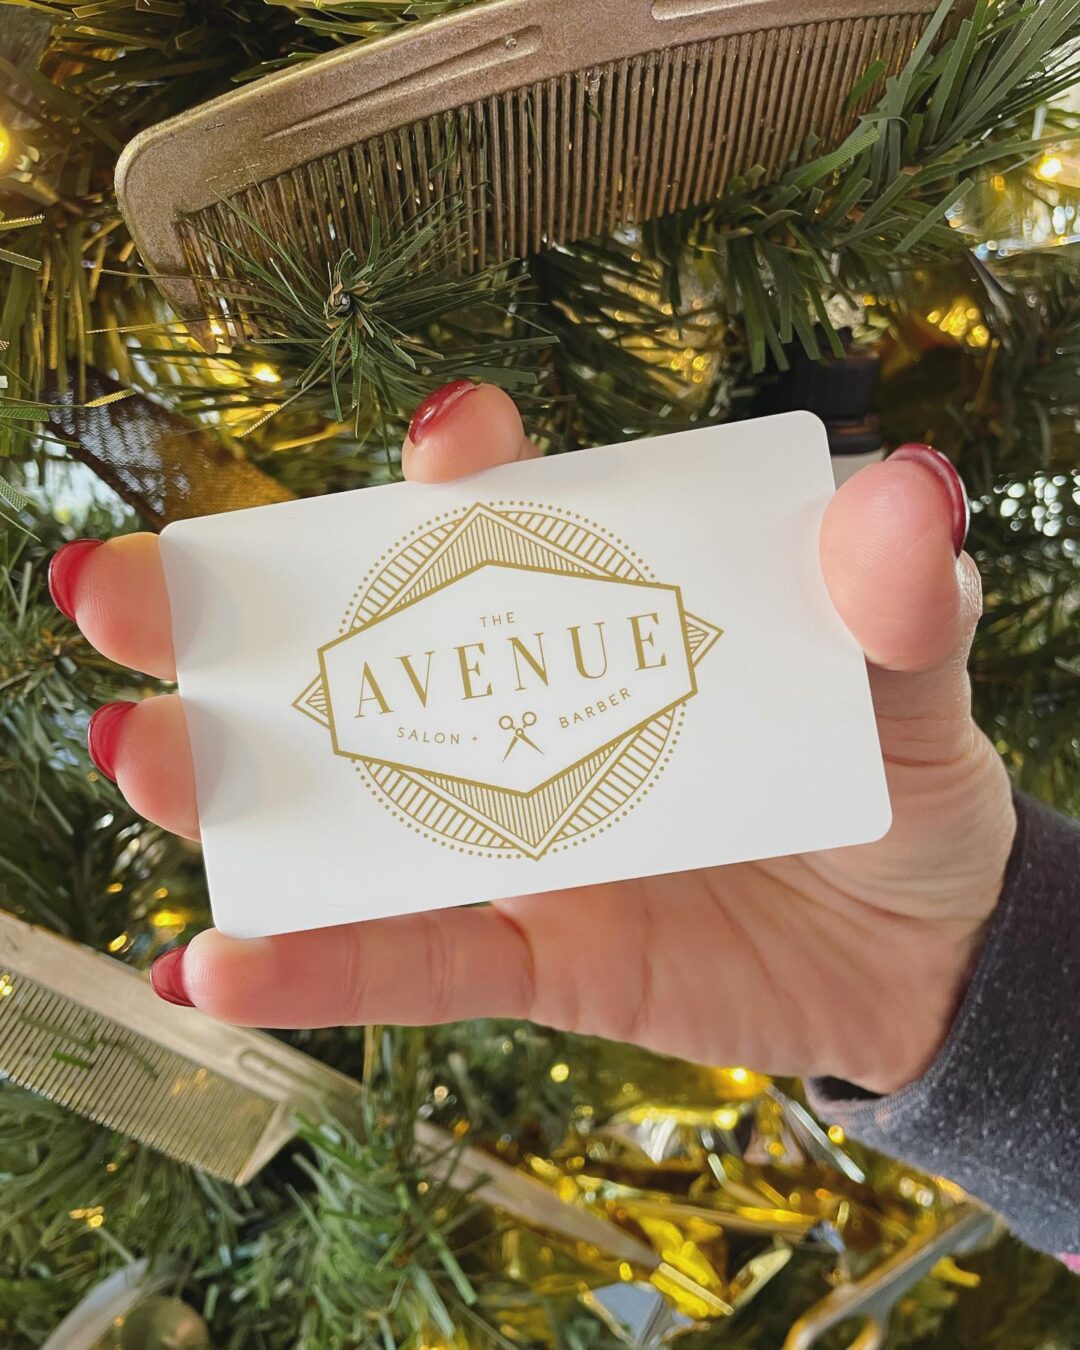 Avenue salon and barber shop gift card against a christmas tree